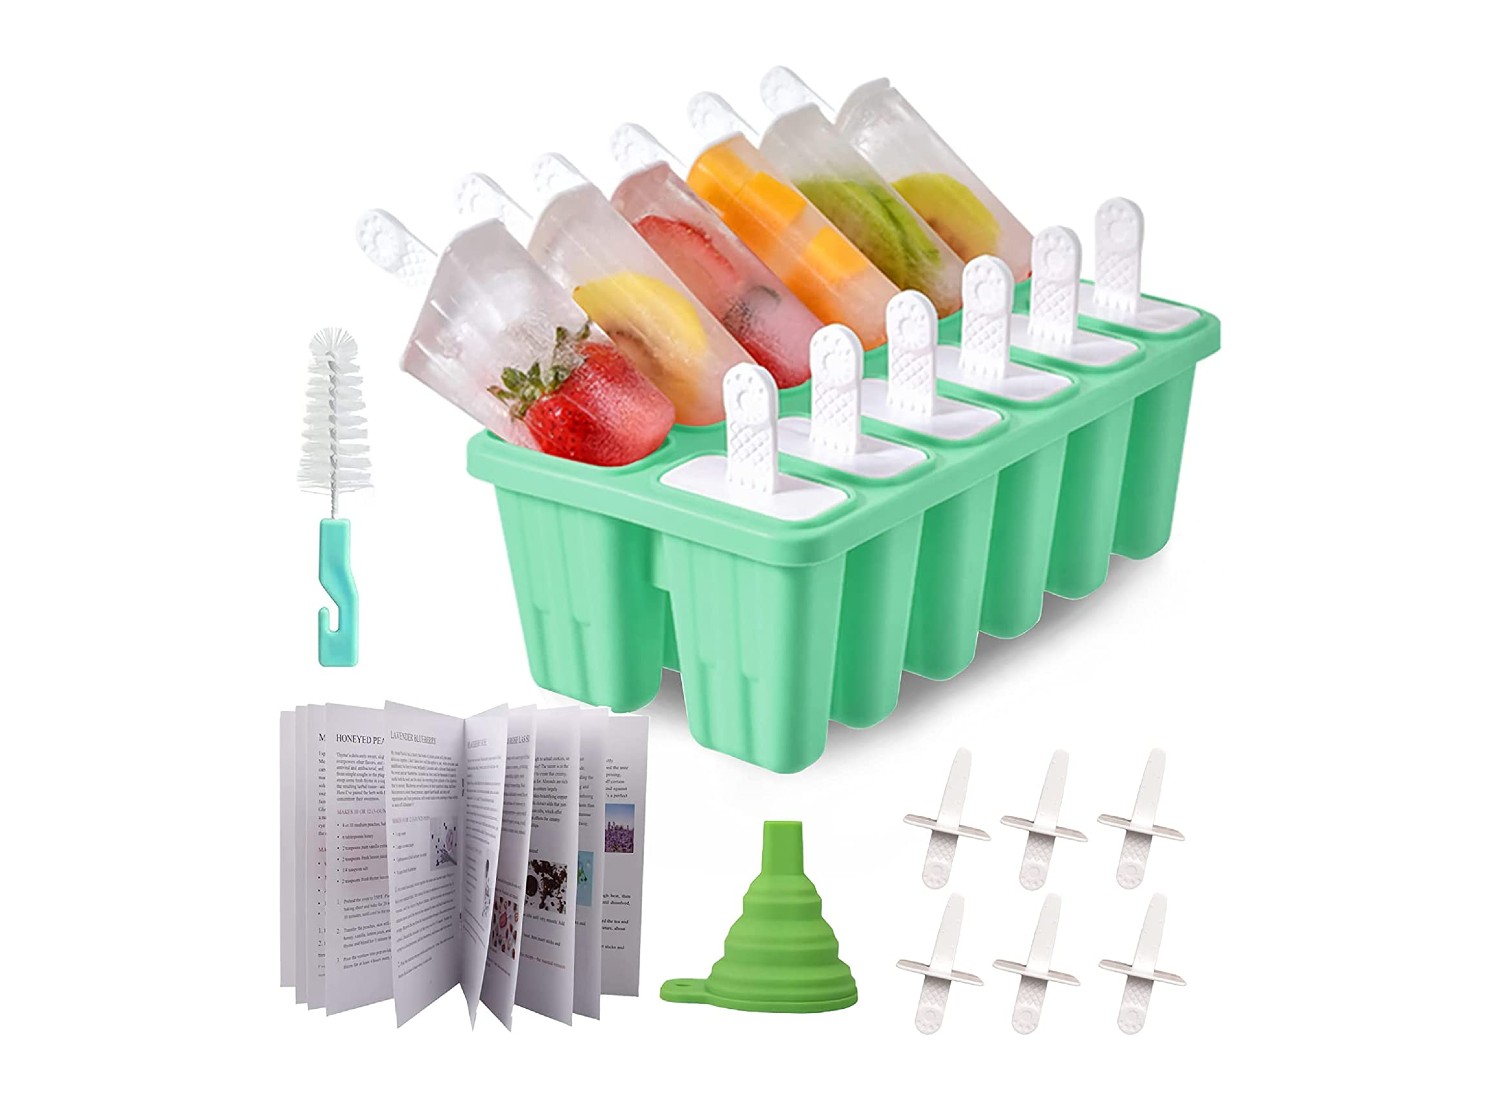 Stainless Steel Popsicle Molds With Sticks. Easy Popsicle Mold Set For  Kids. 6 Bpa Free Popsicle Molds + Holder, Leak Proof Silicone Seal, And  Popsicl